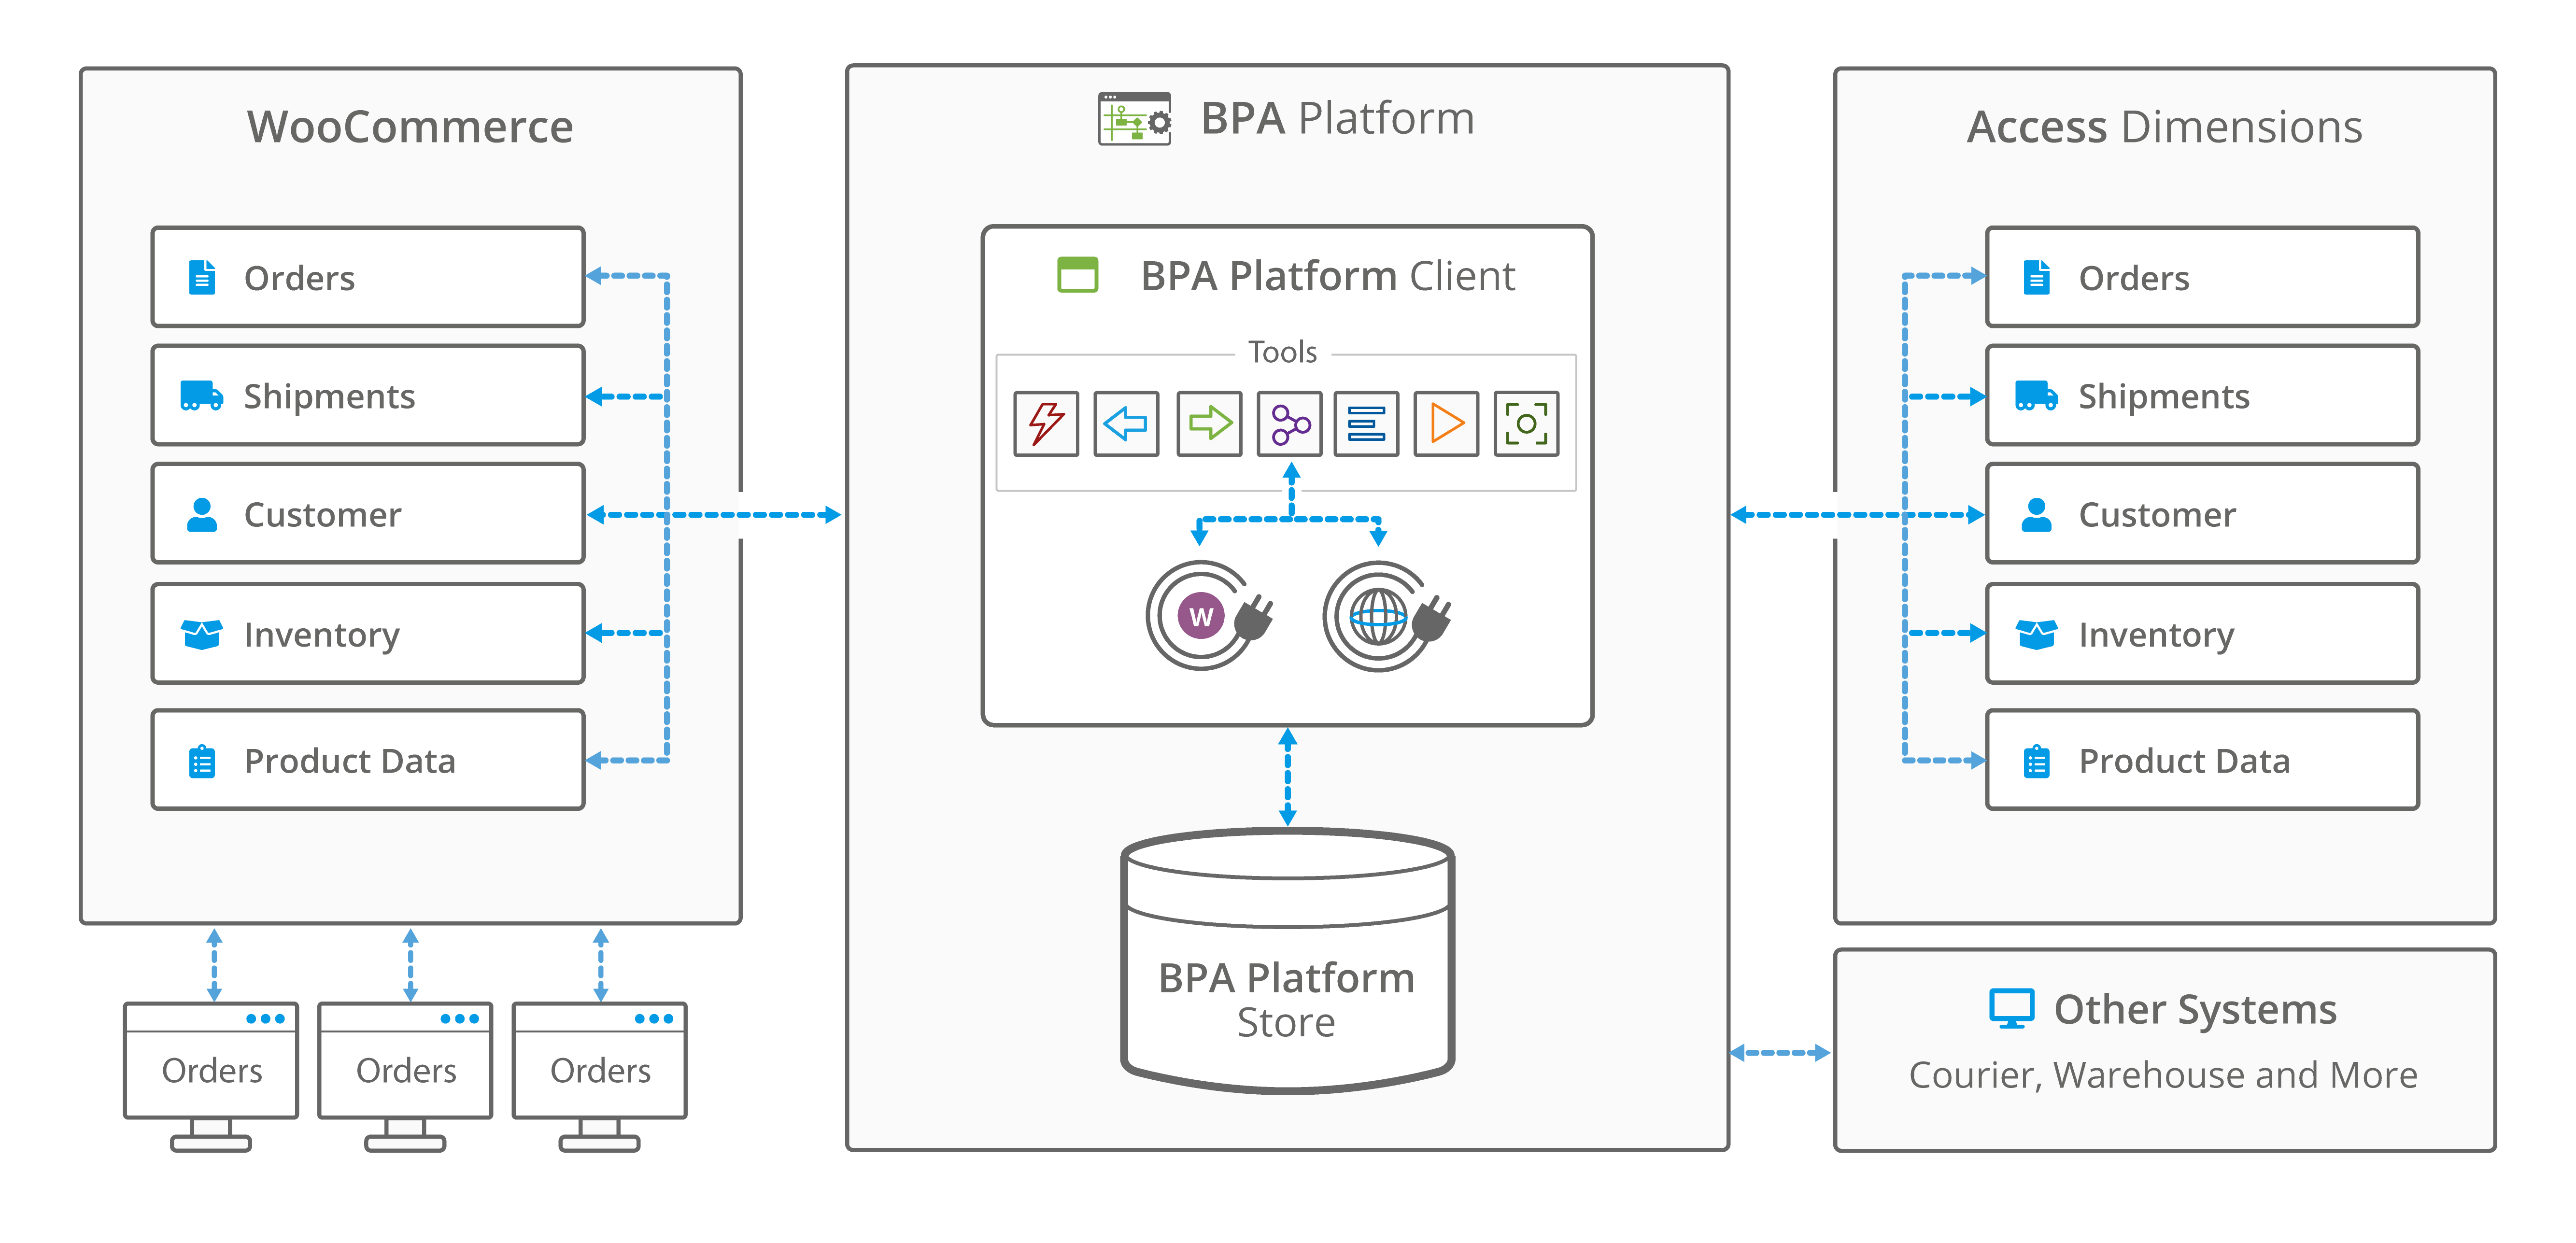 WooCommerce connector for Access Dimensions integration architecture - BPA Platform